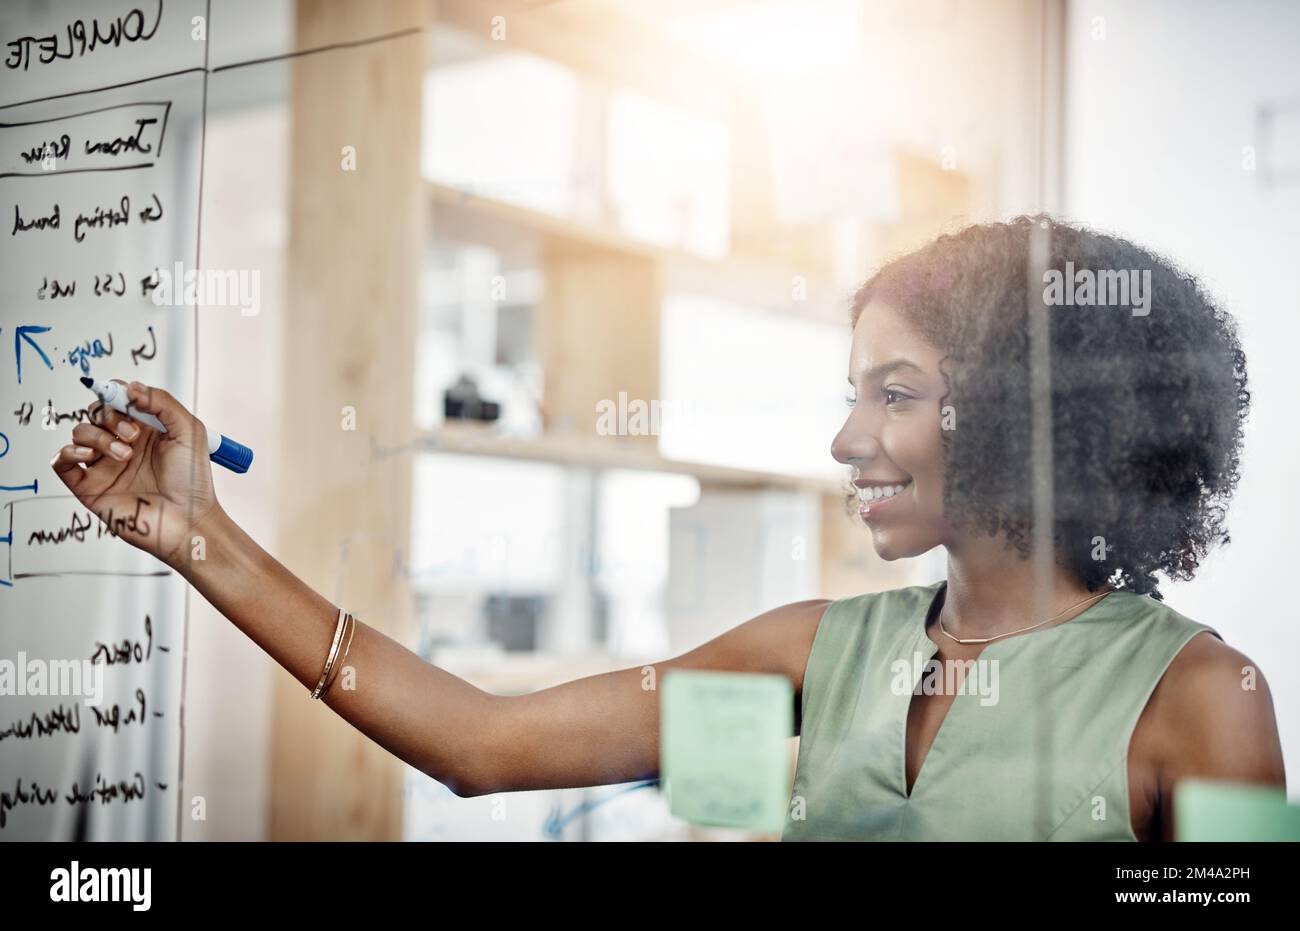 Shes in the process of planning. an attractive young businesswoman working on a glass wipe board in her office. Stock Photo